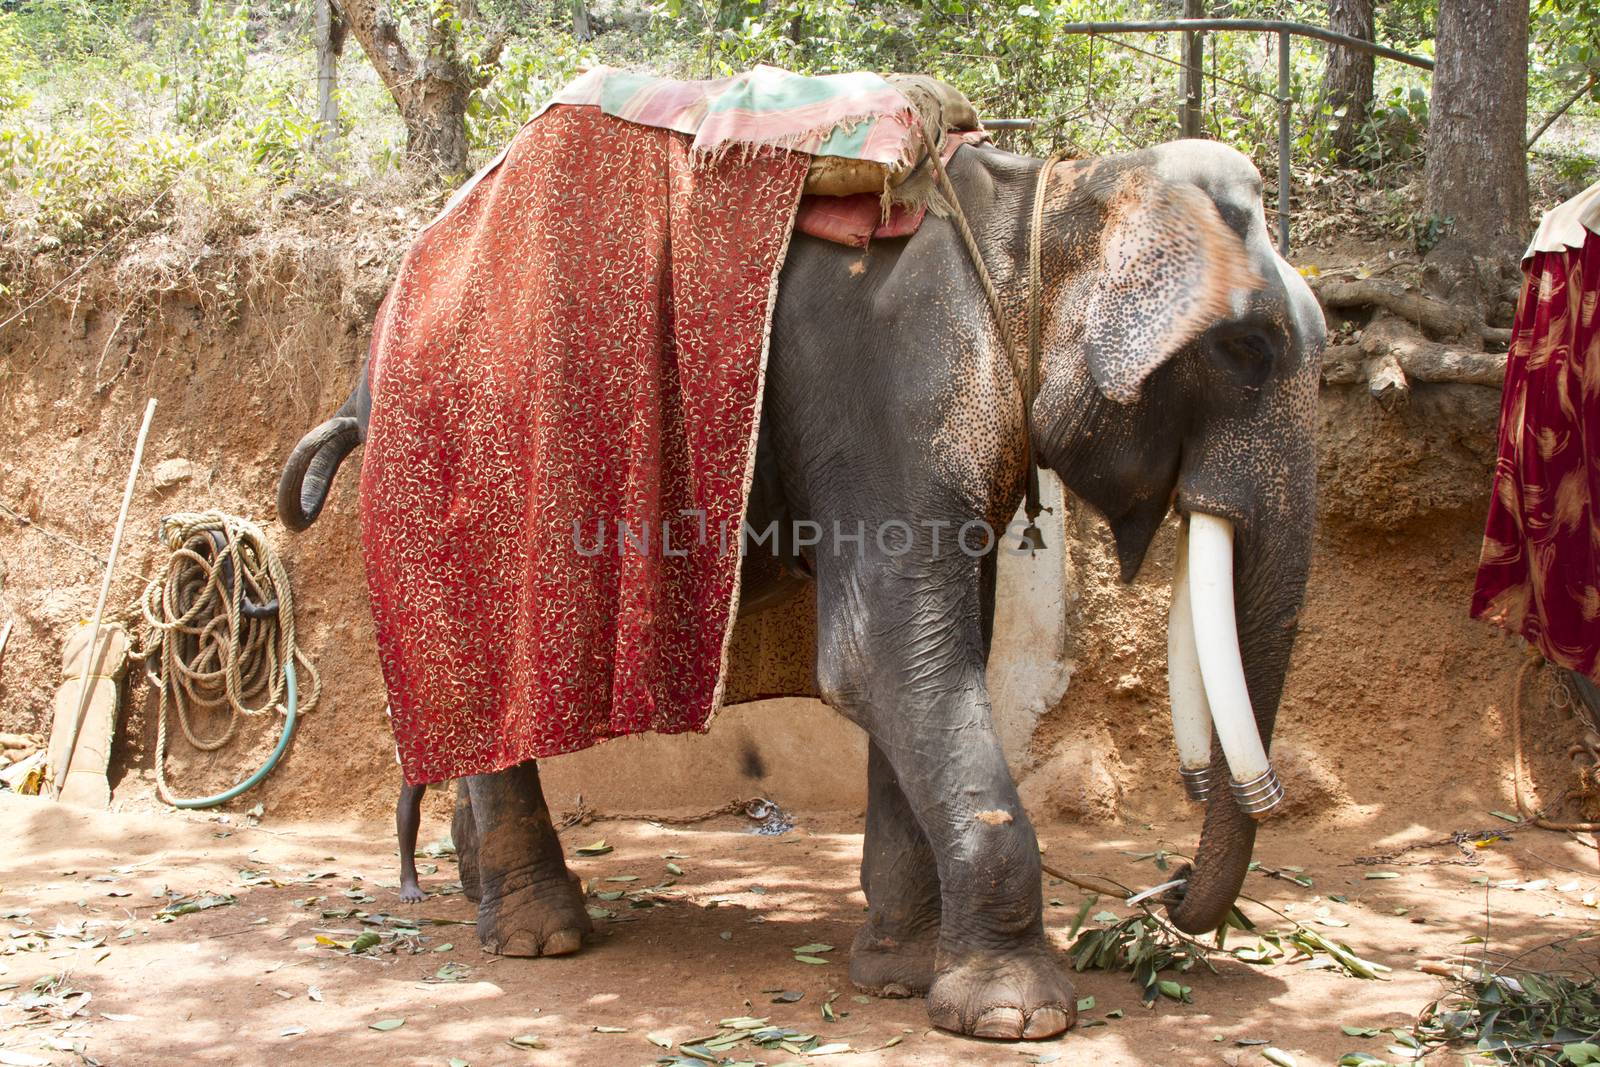 The beautiful Indian elephant with a seat for passengers costs waiting for people by mcherevan